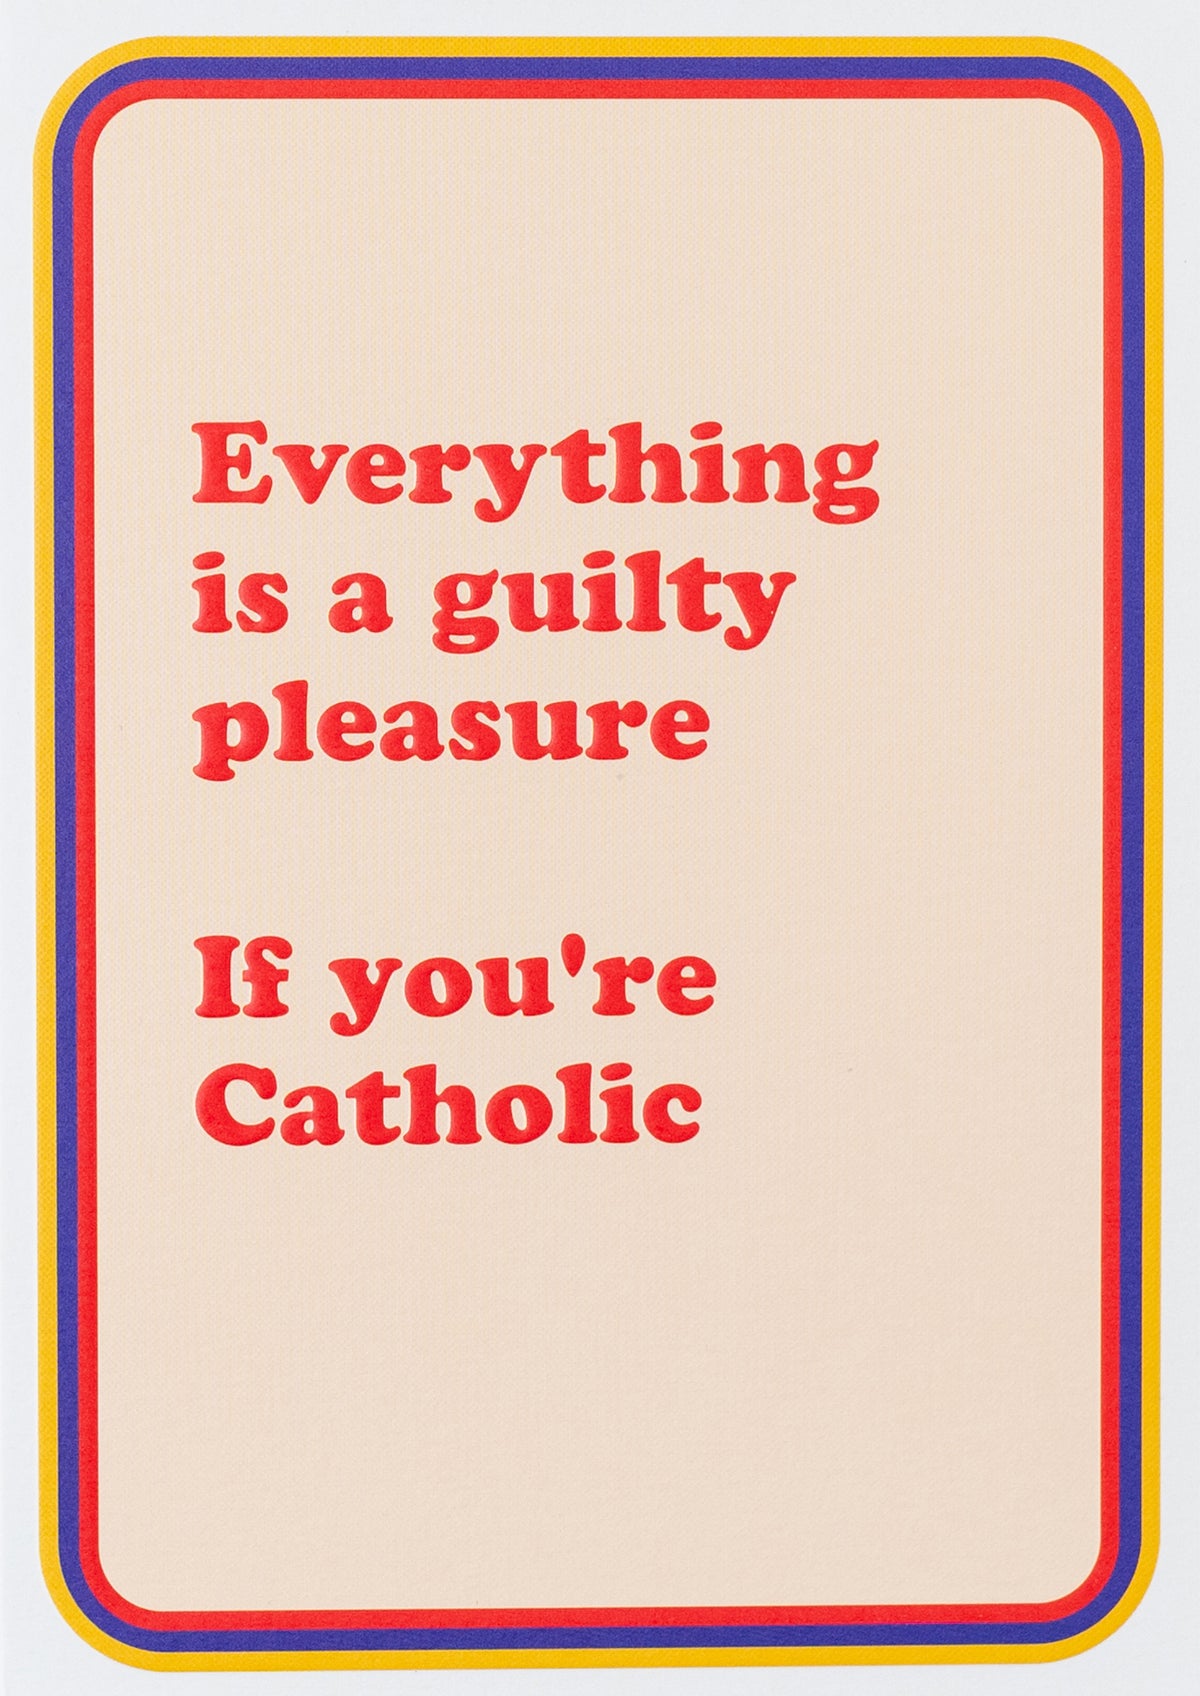 Catholic Guilty Pleasure Funny Card by cath tate cards at penny black